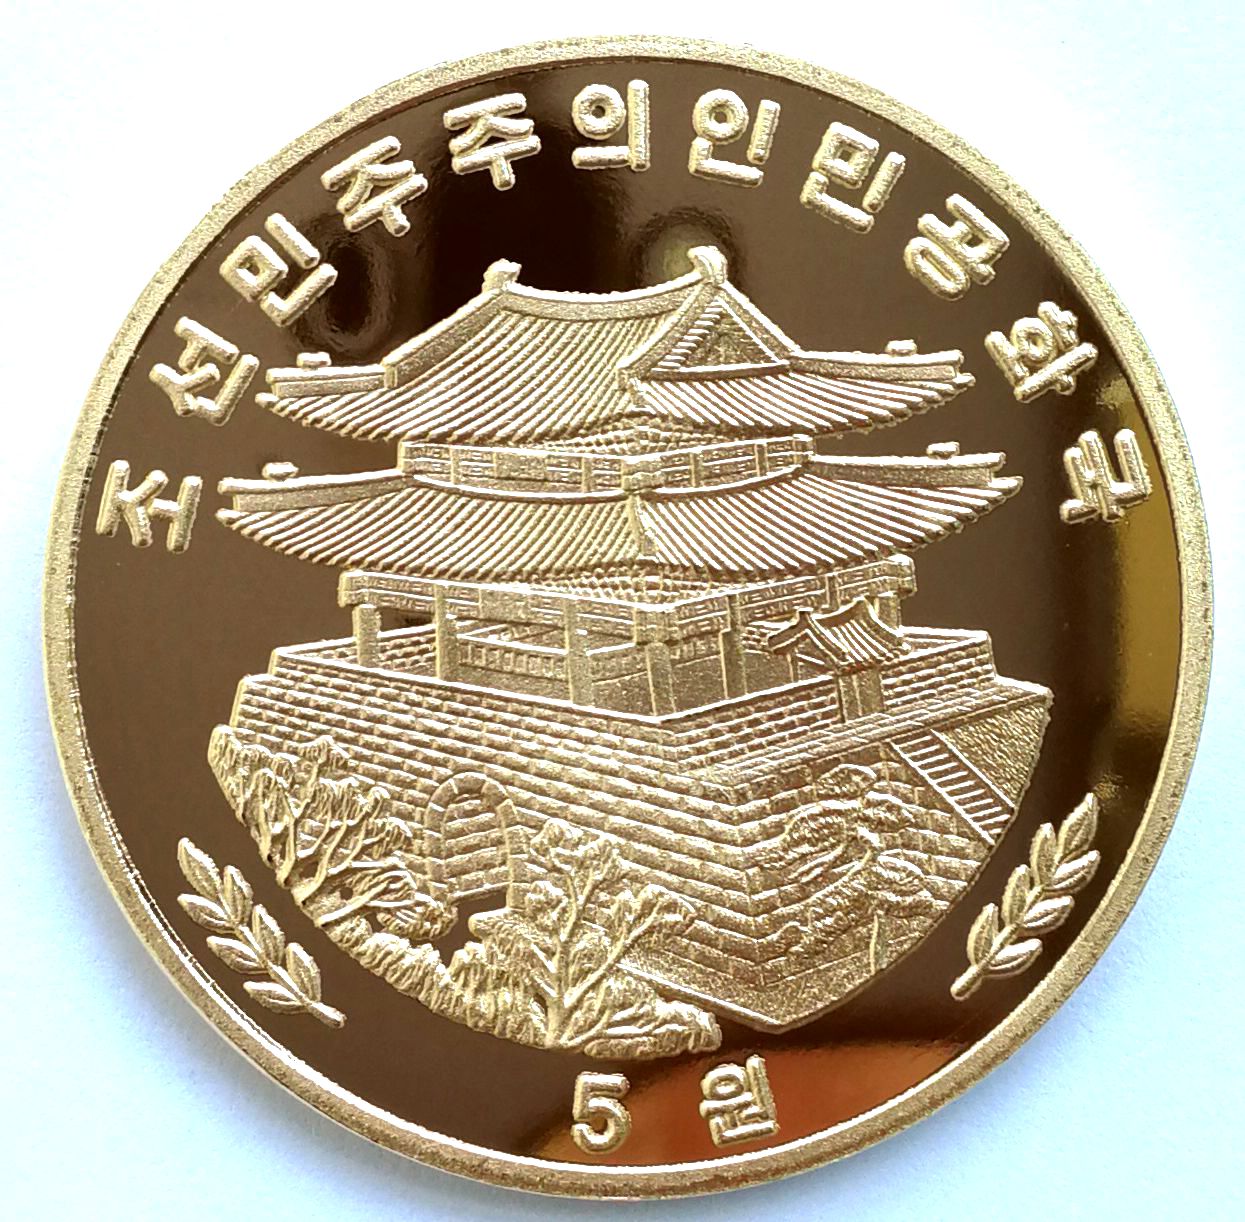 L3207, Korea Painting Commemorative Coin "Meeting on the Road", Brass 2016 - Click Image to Close